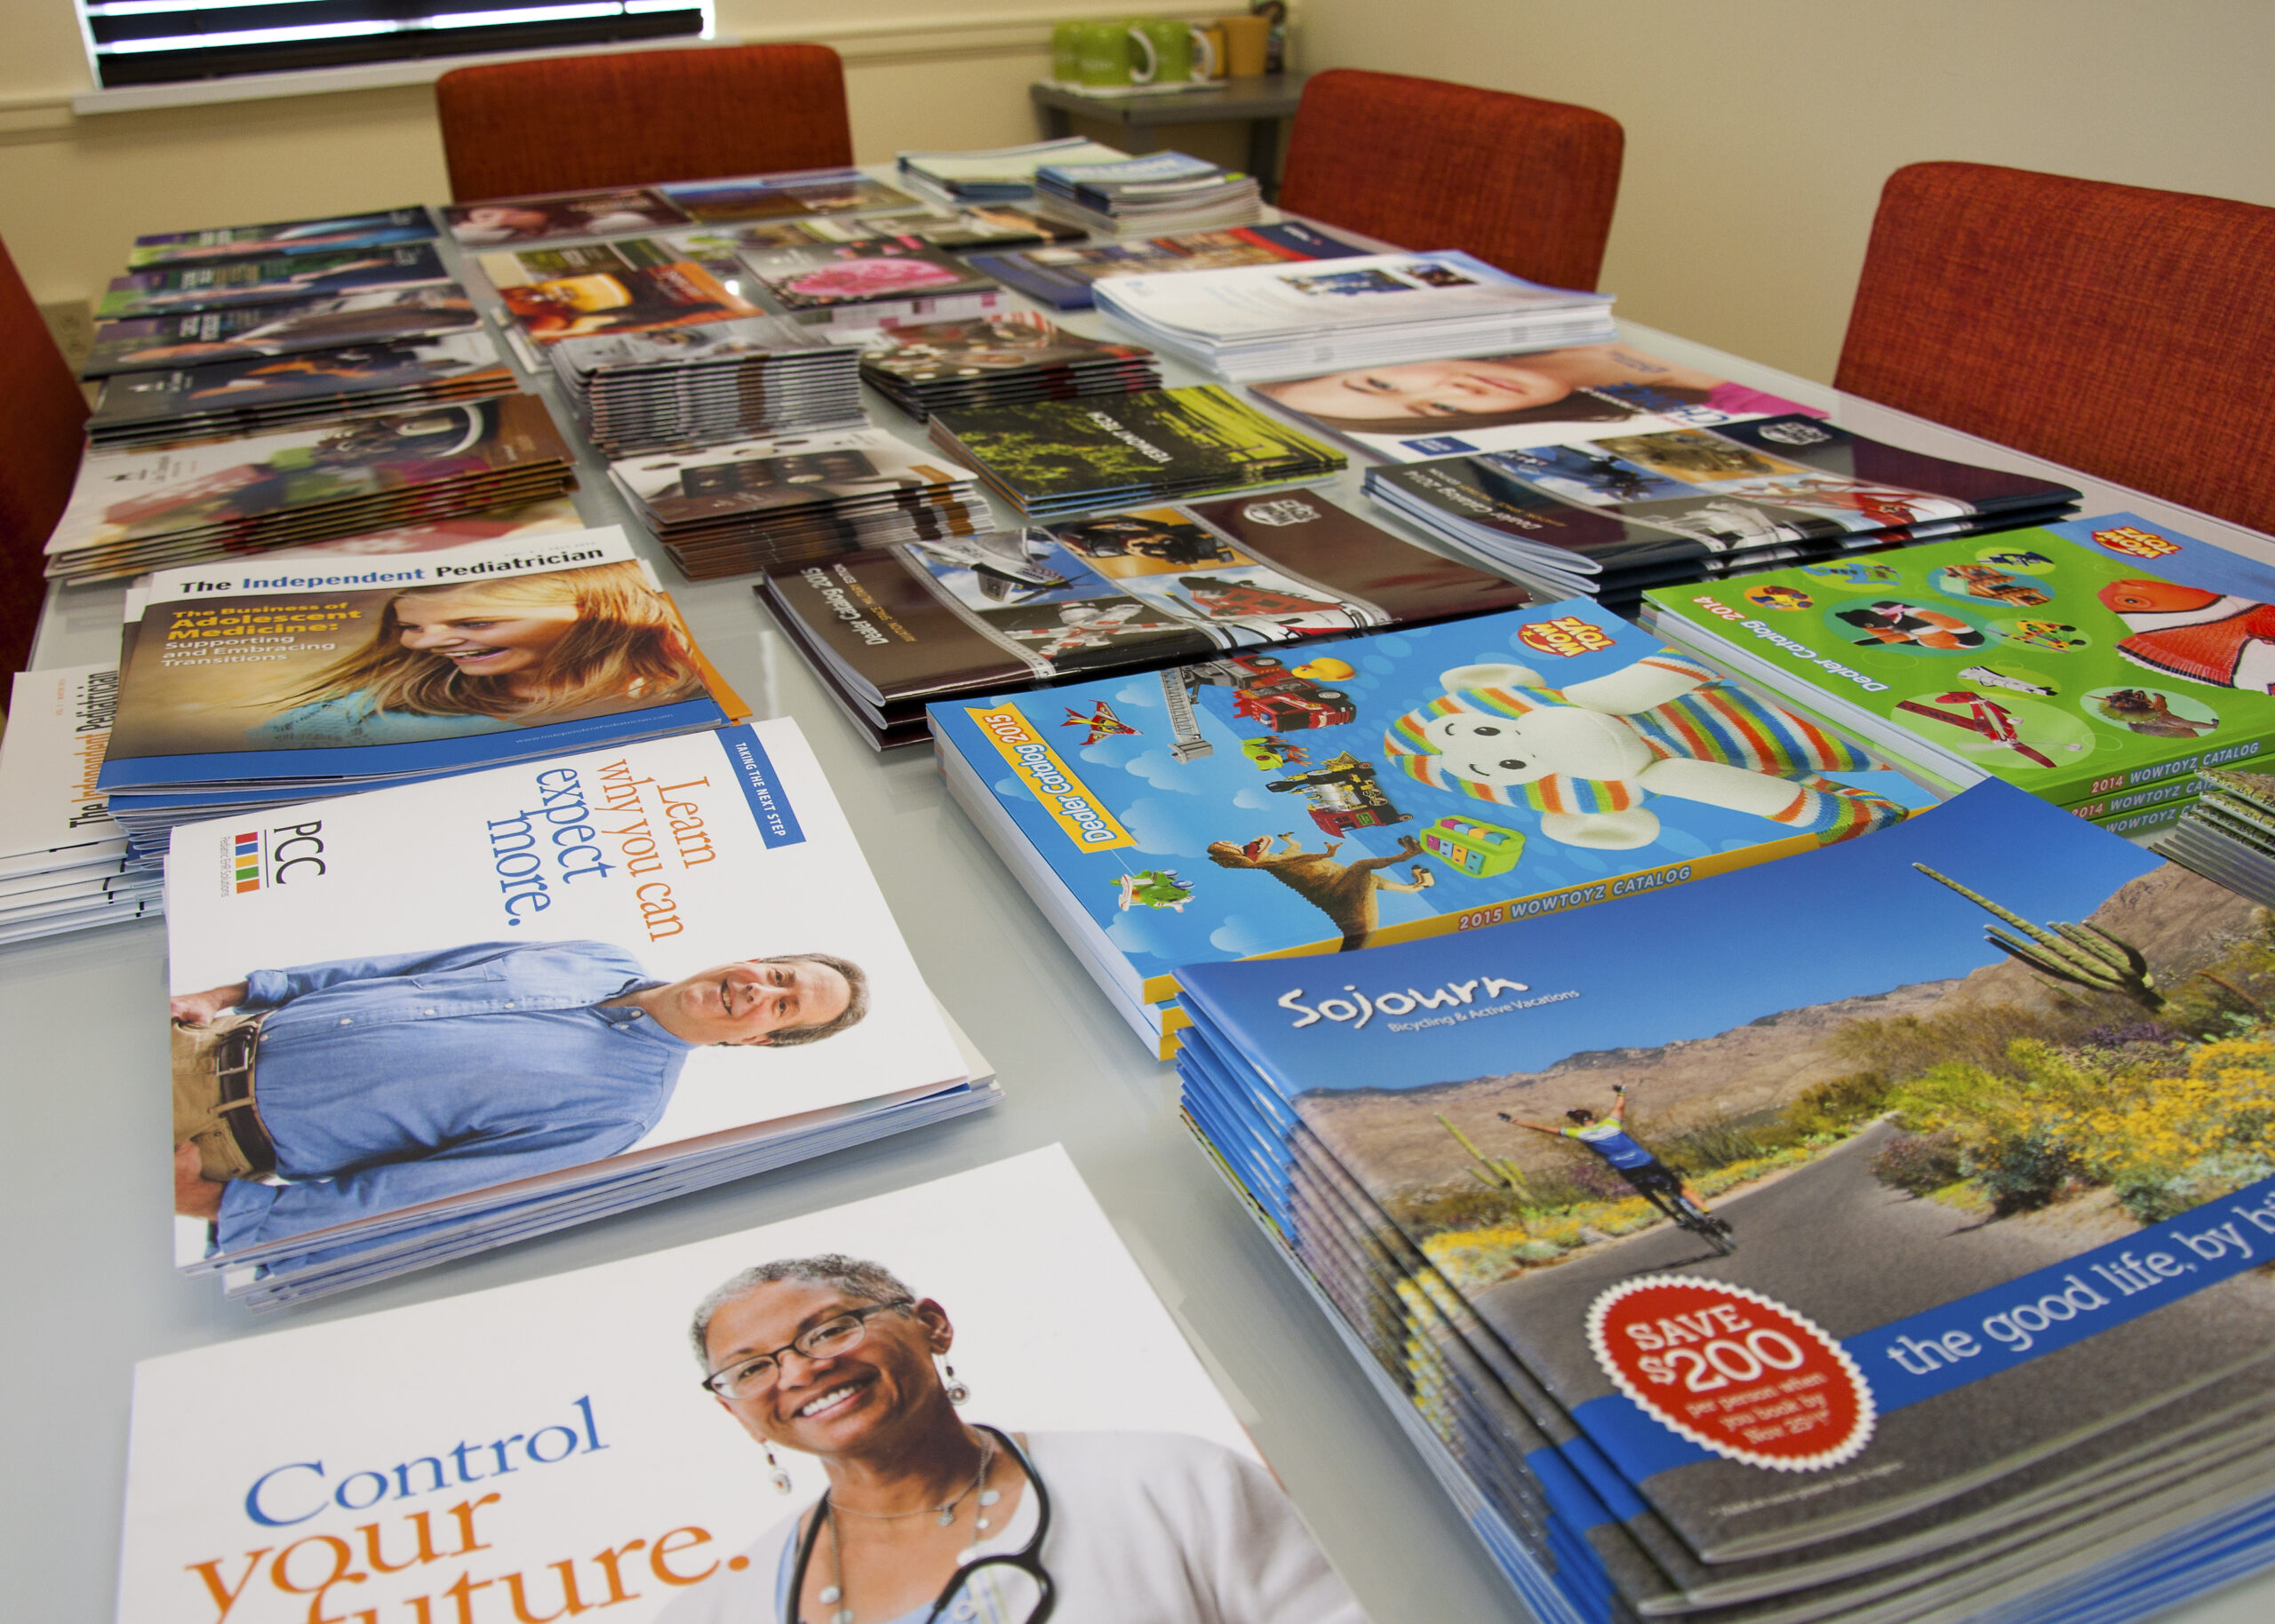 Array of Stride printed materials on table